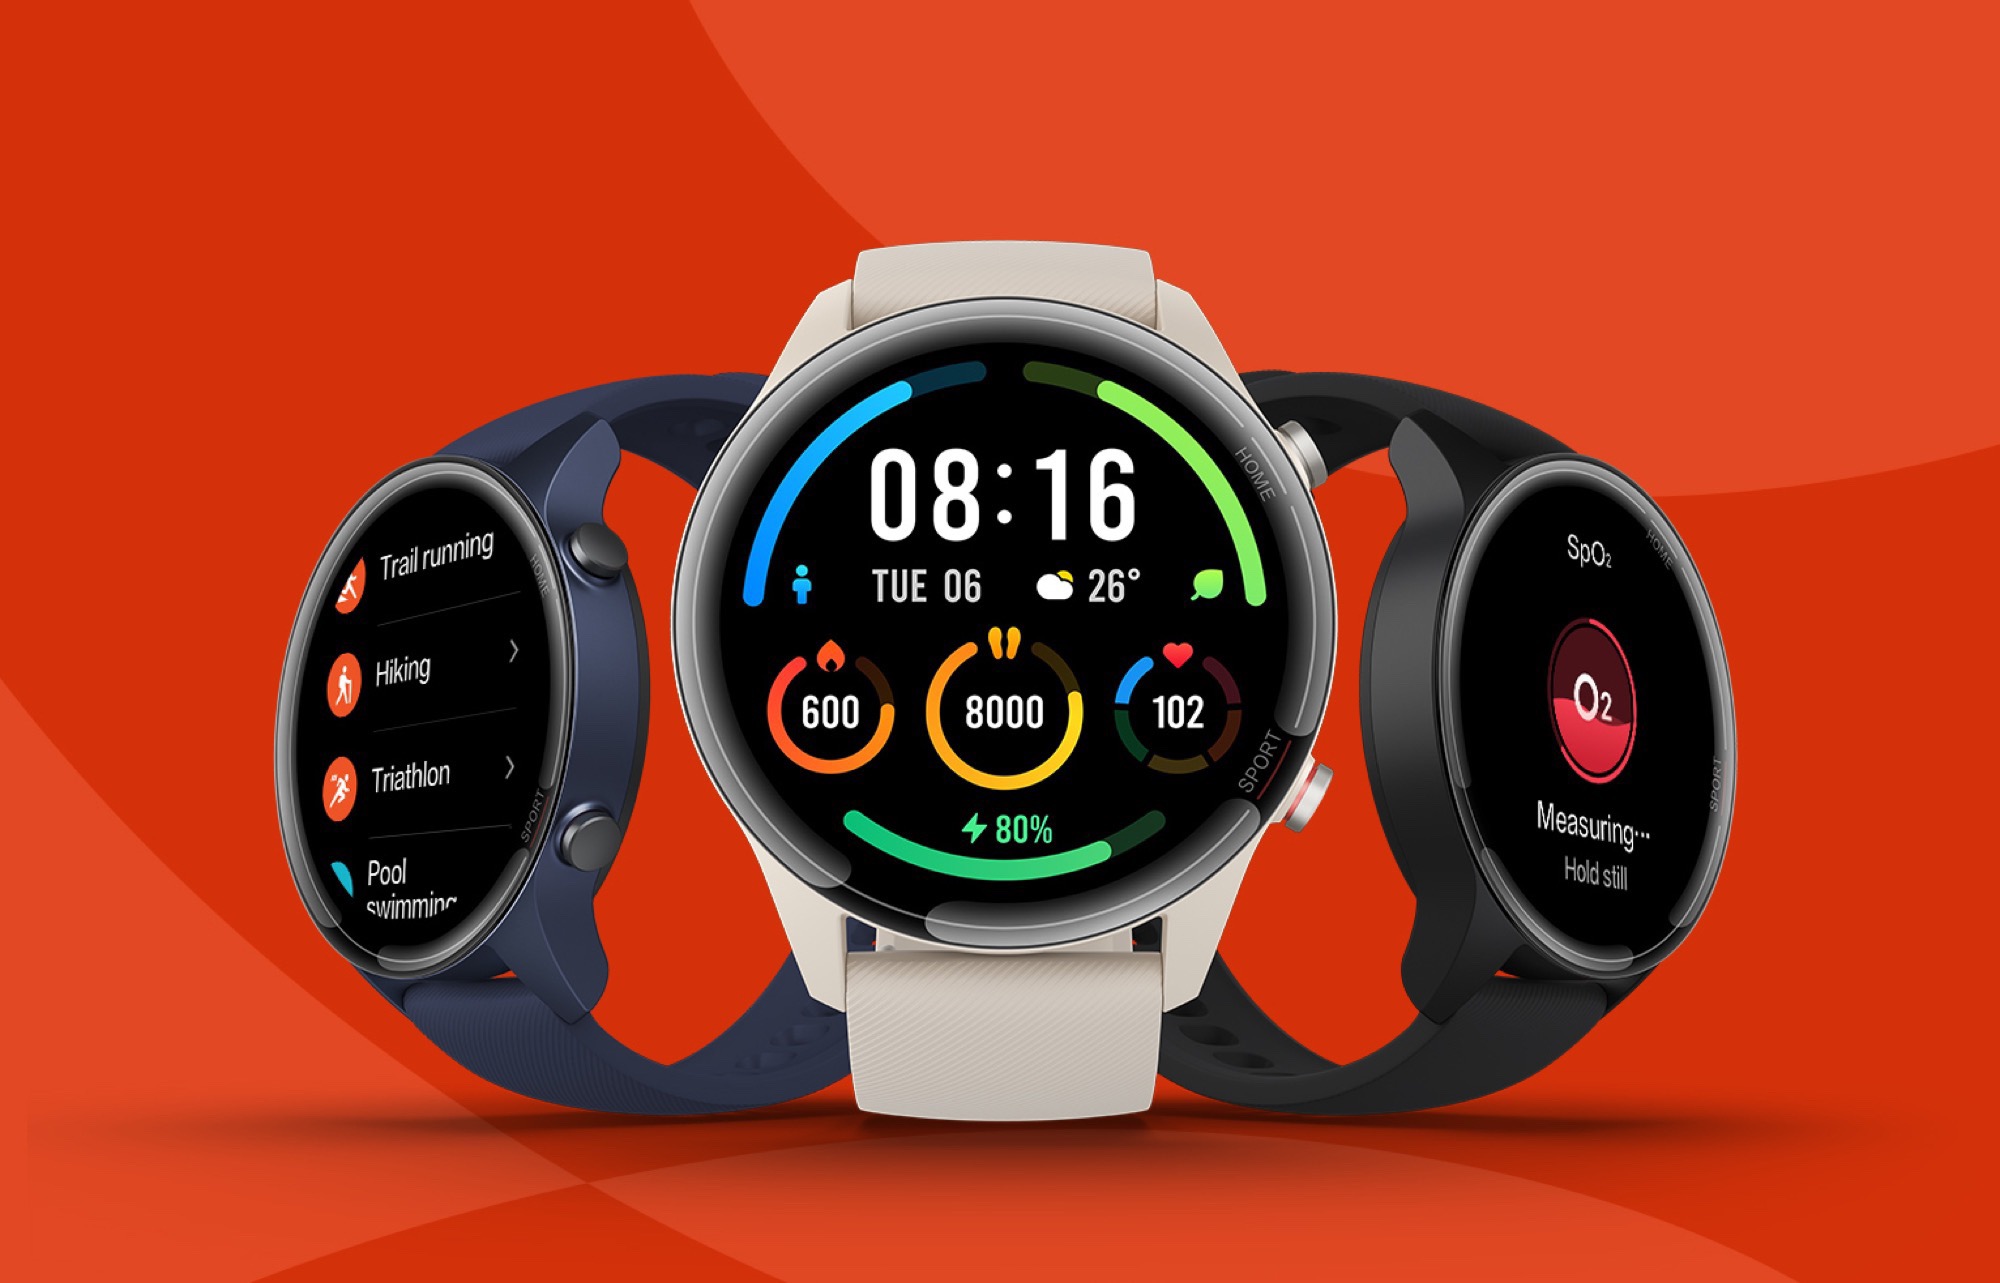 Xiaomi Watch S1 to launch within the next few months, launches scheduled in  Europe and Asia Pacific countries -  News